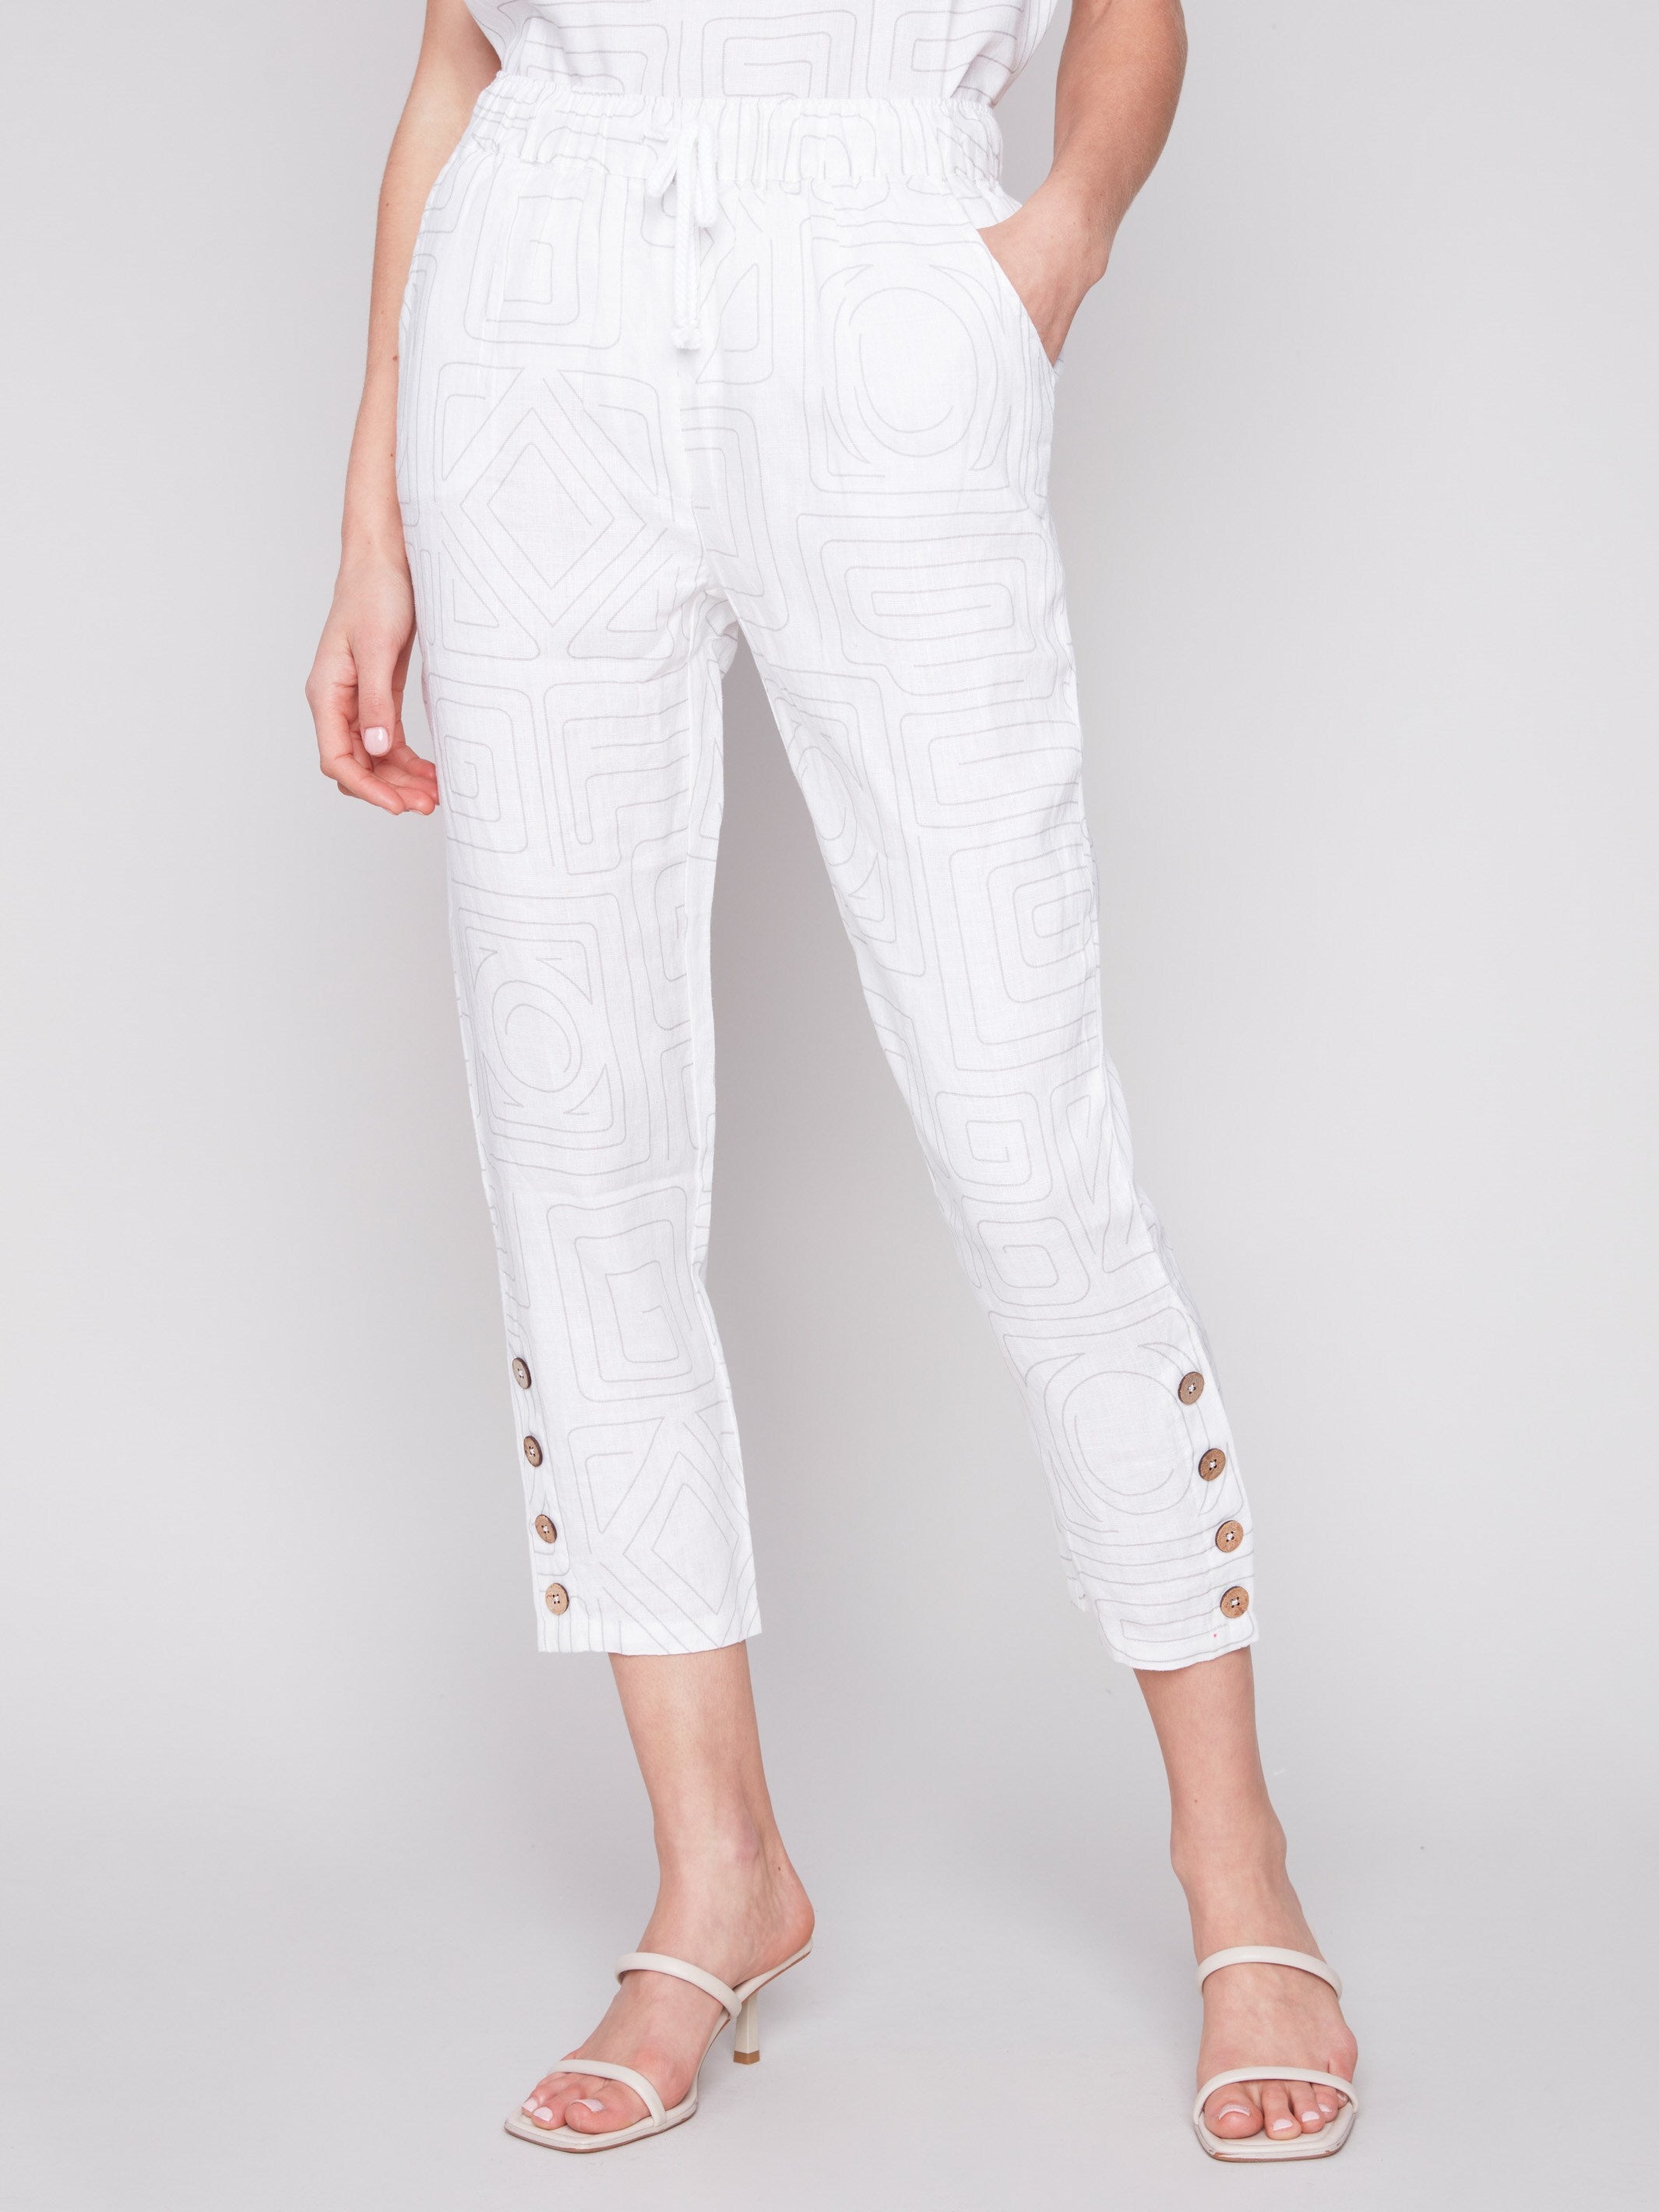 Linen Jogger Pants with Button Detail - Light Grey - Charlie B Collection Canada - Image 2